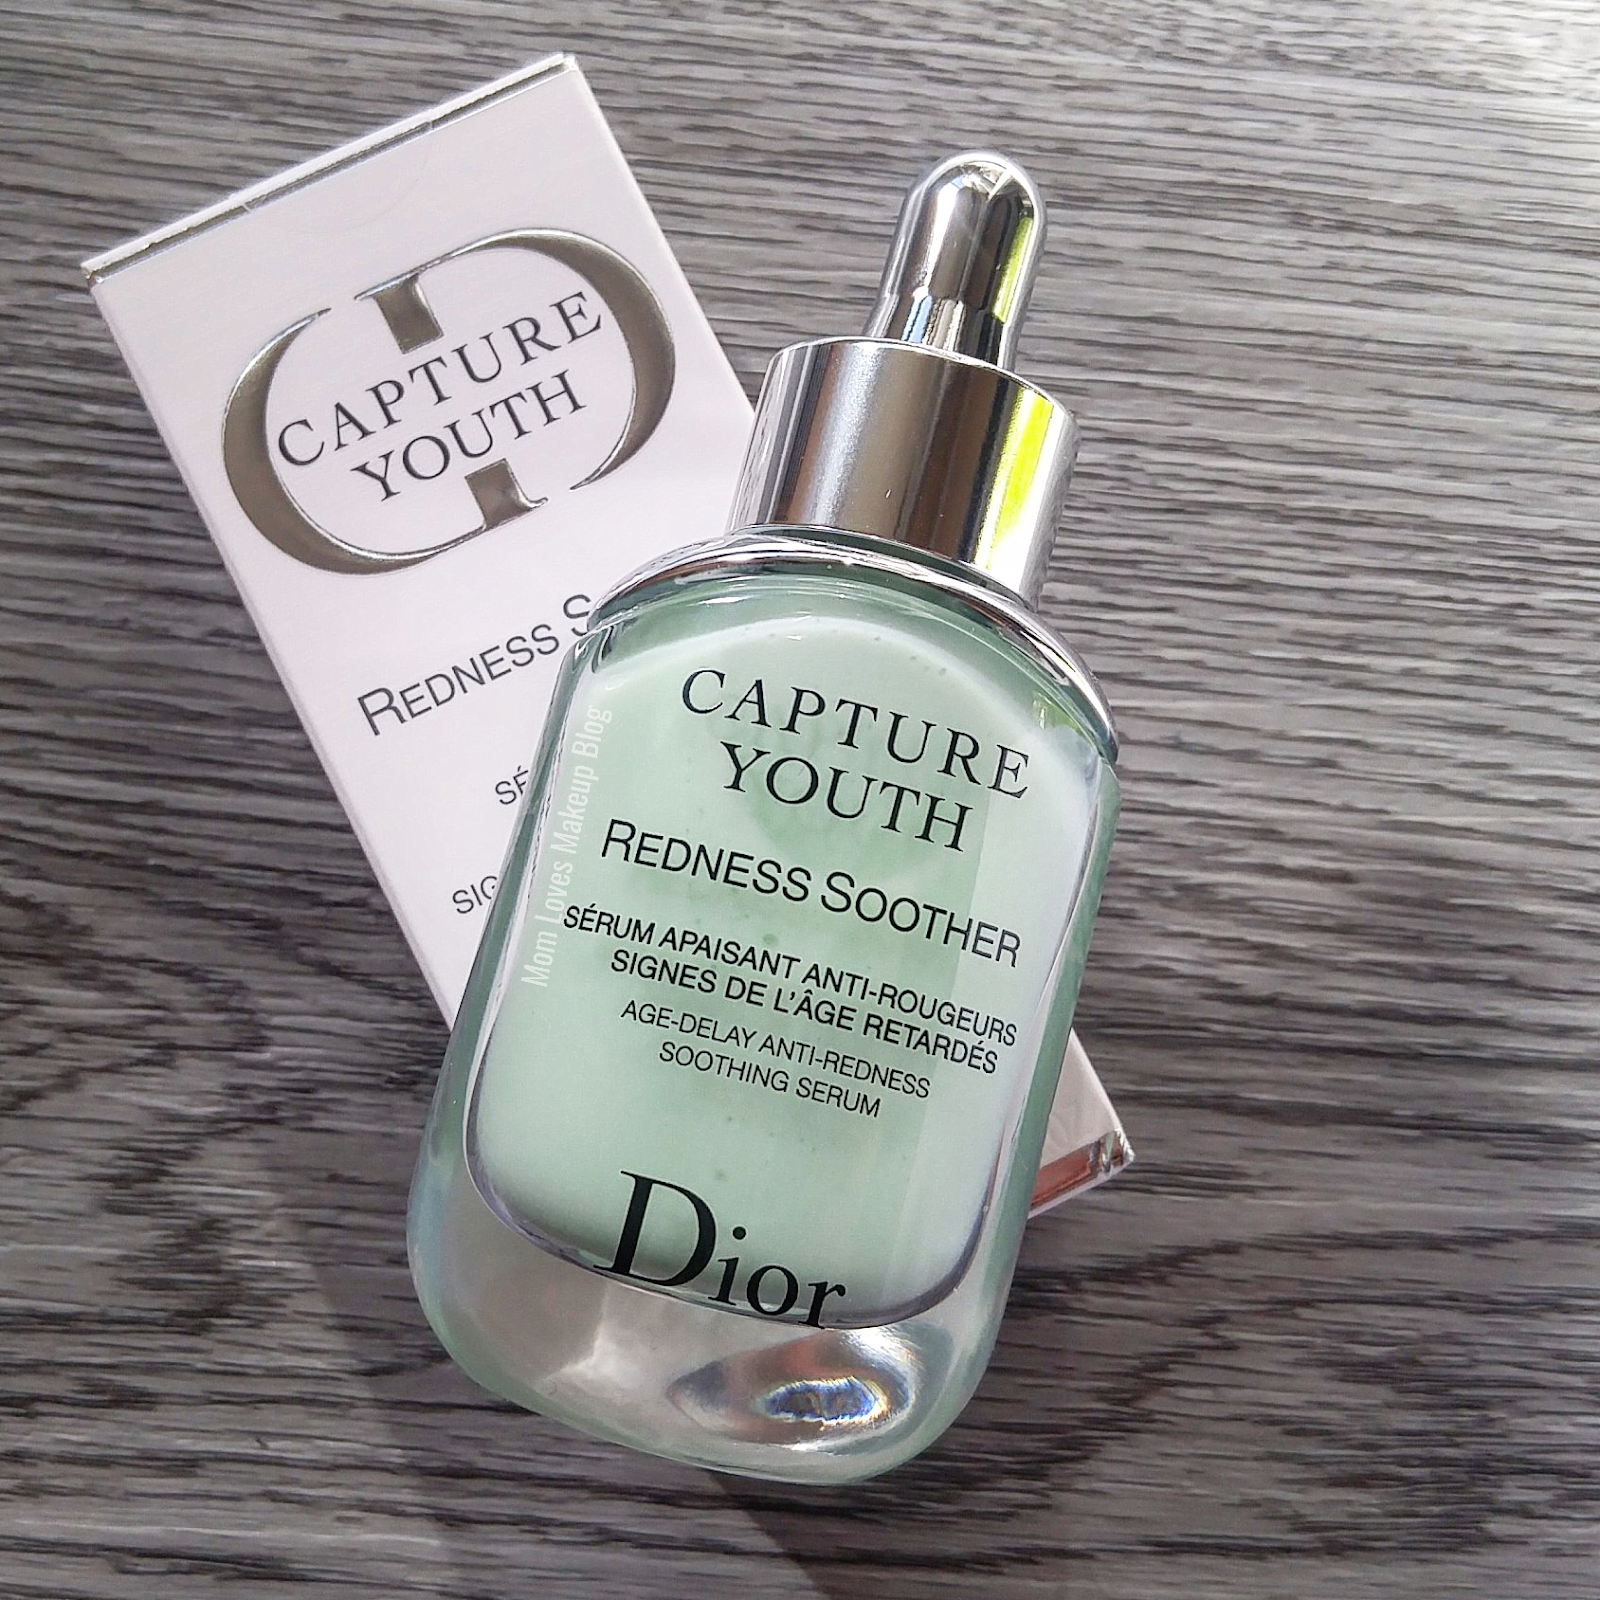 capture youth dior redness soother opiniones